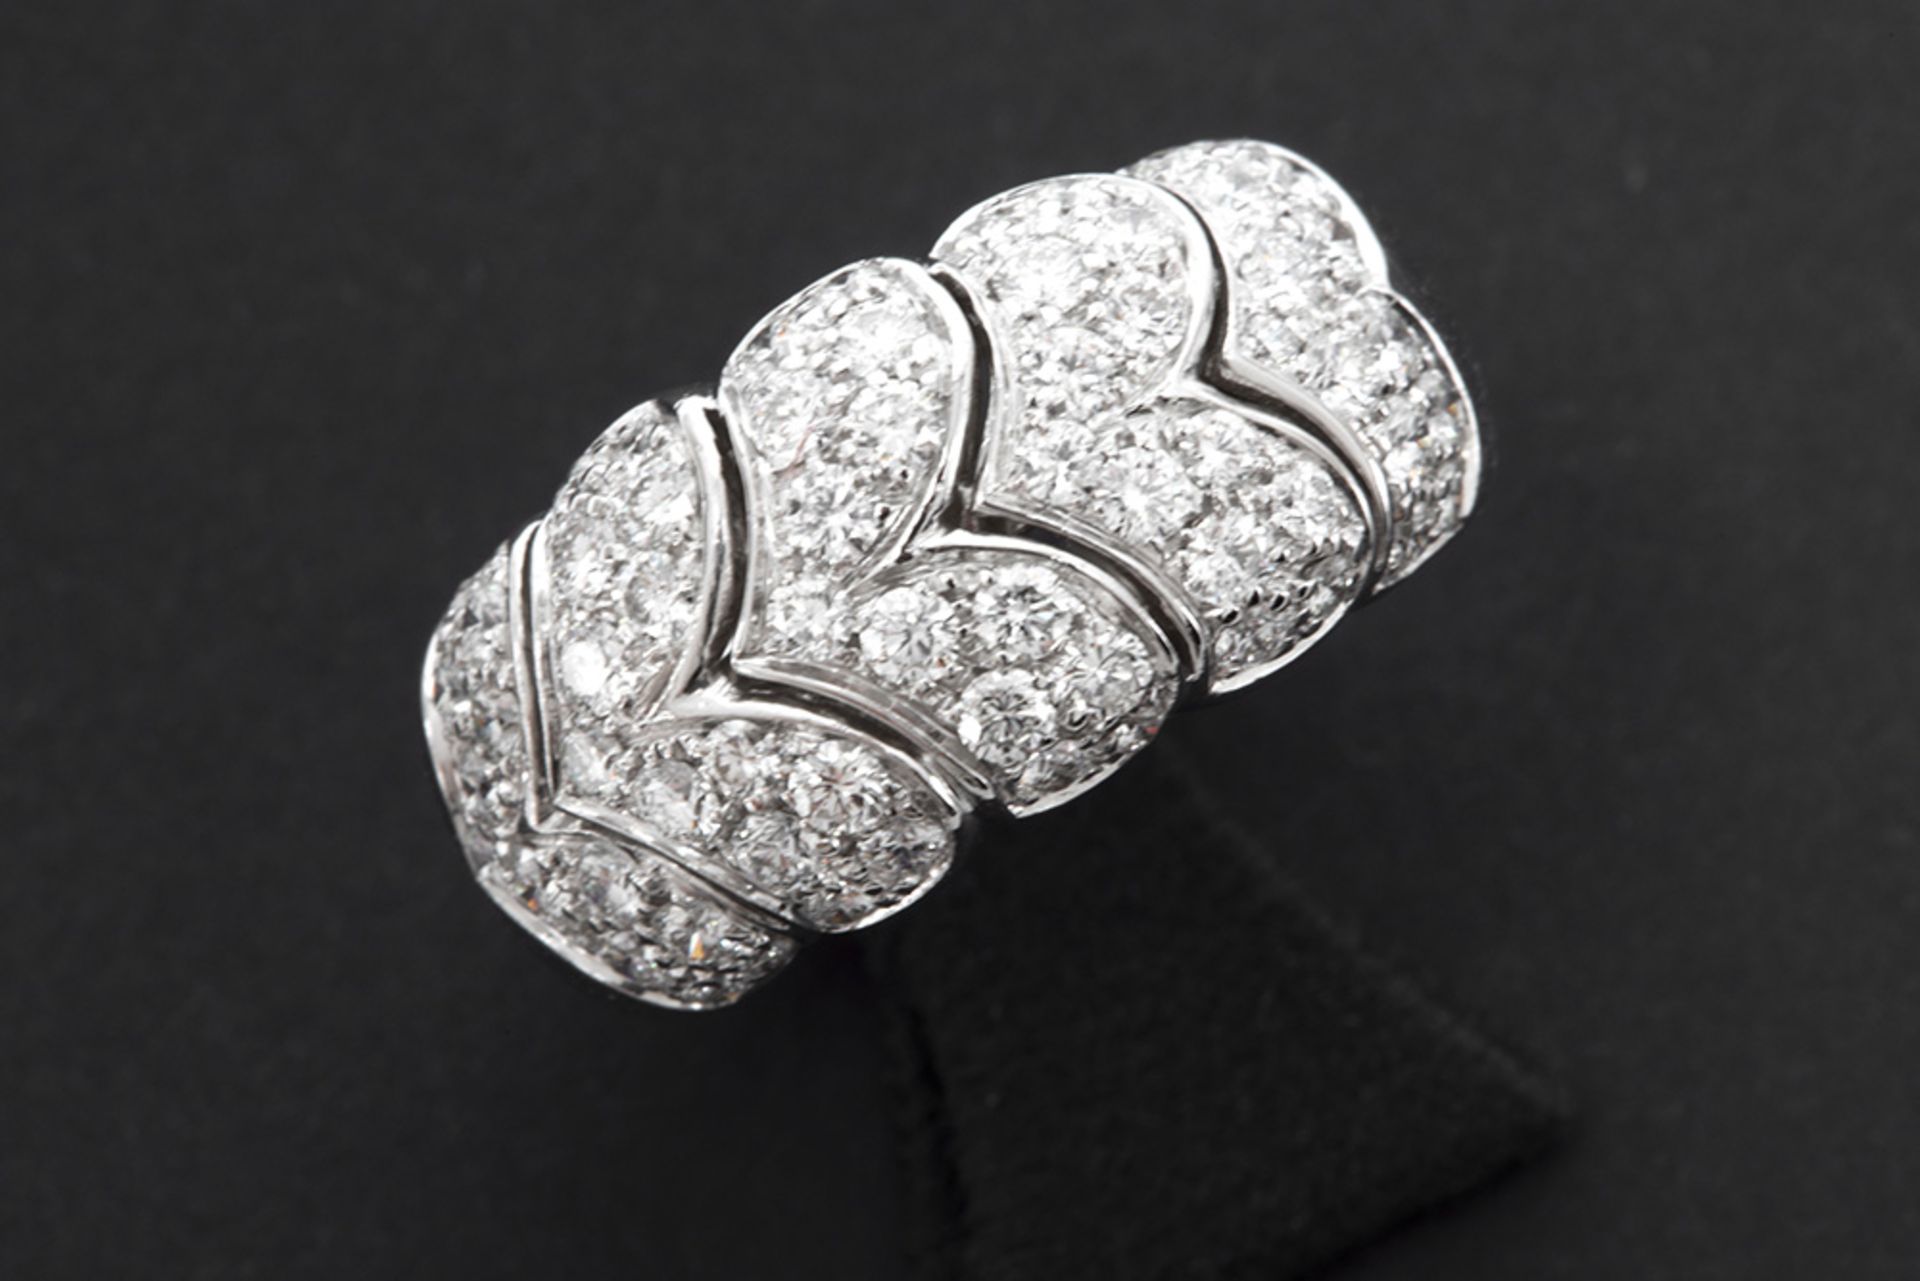 ring in white gold (18 carat) with ca 1,90 carat of very high quality brilliant cut diamonds || Vrij